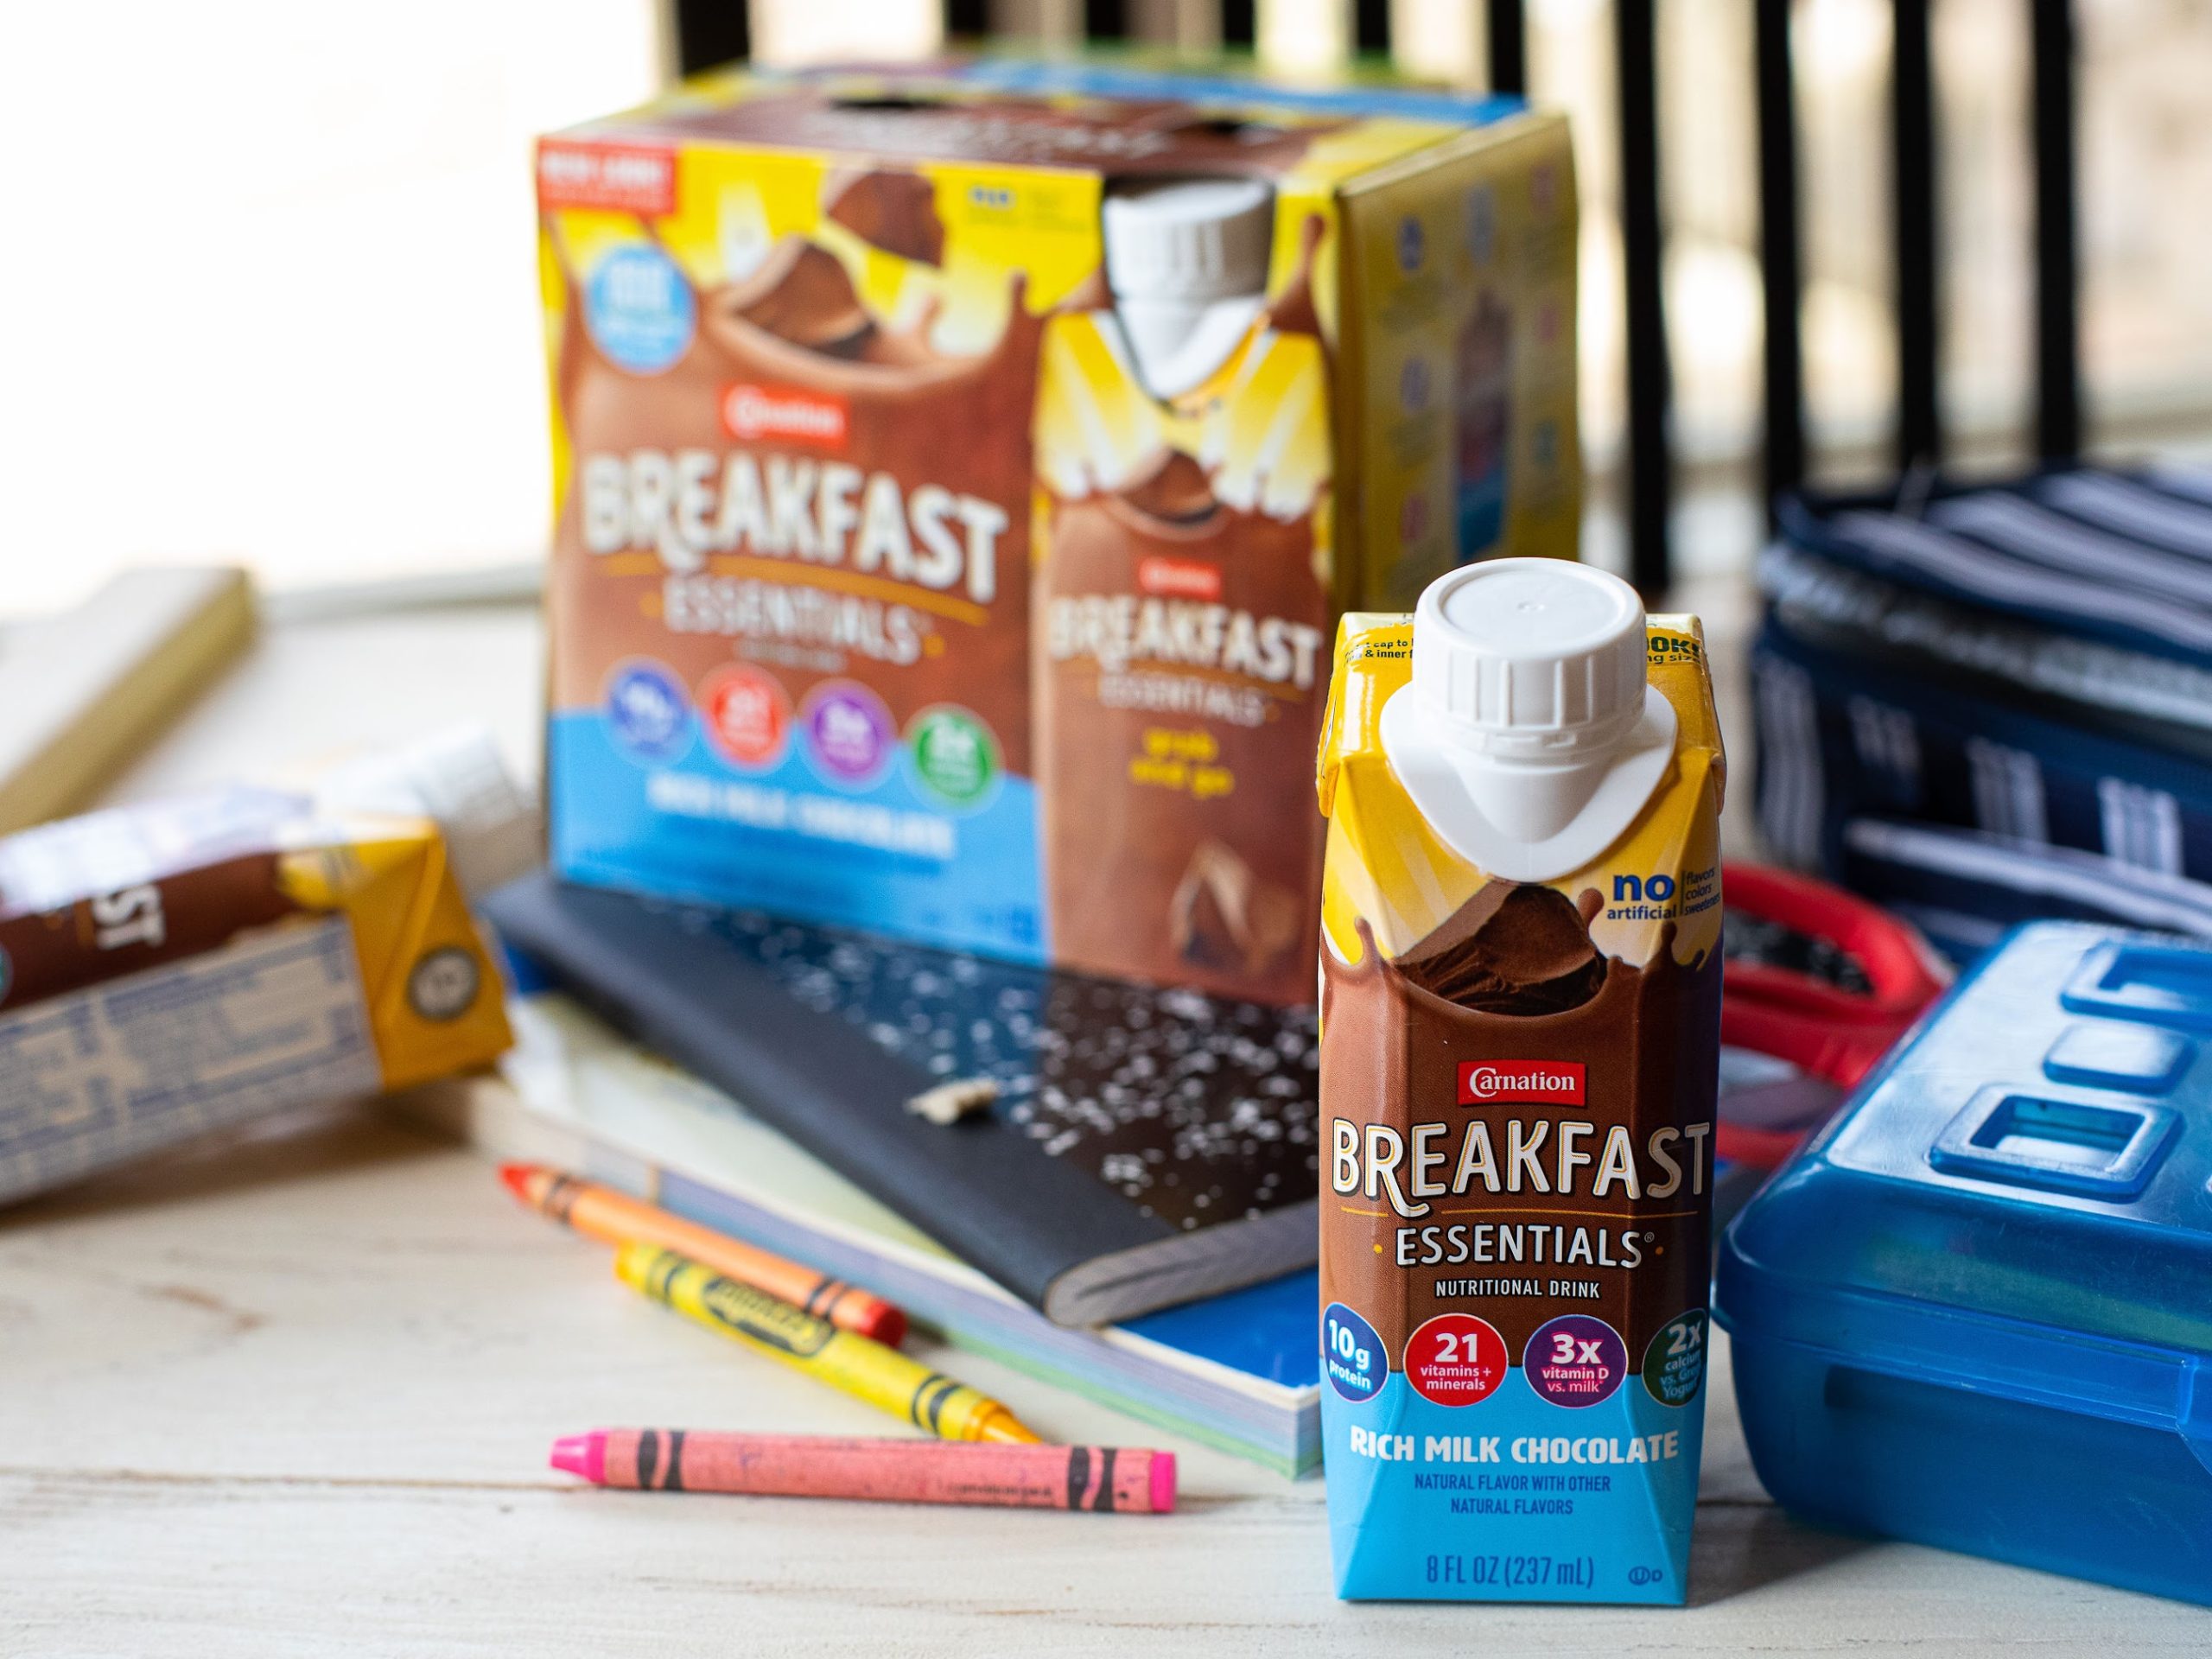 Start The New Year Off Right With The Great Taste Of Carnation Breakfast Essentials® - New Look Now At Publix on I Heart Publix 1